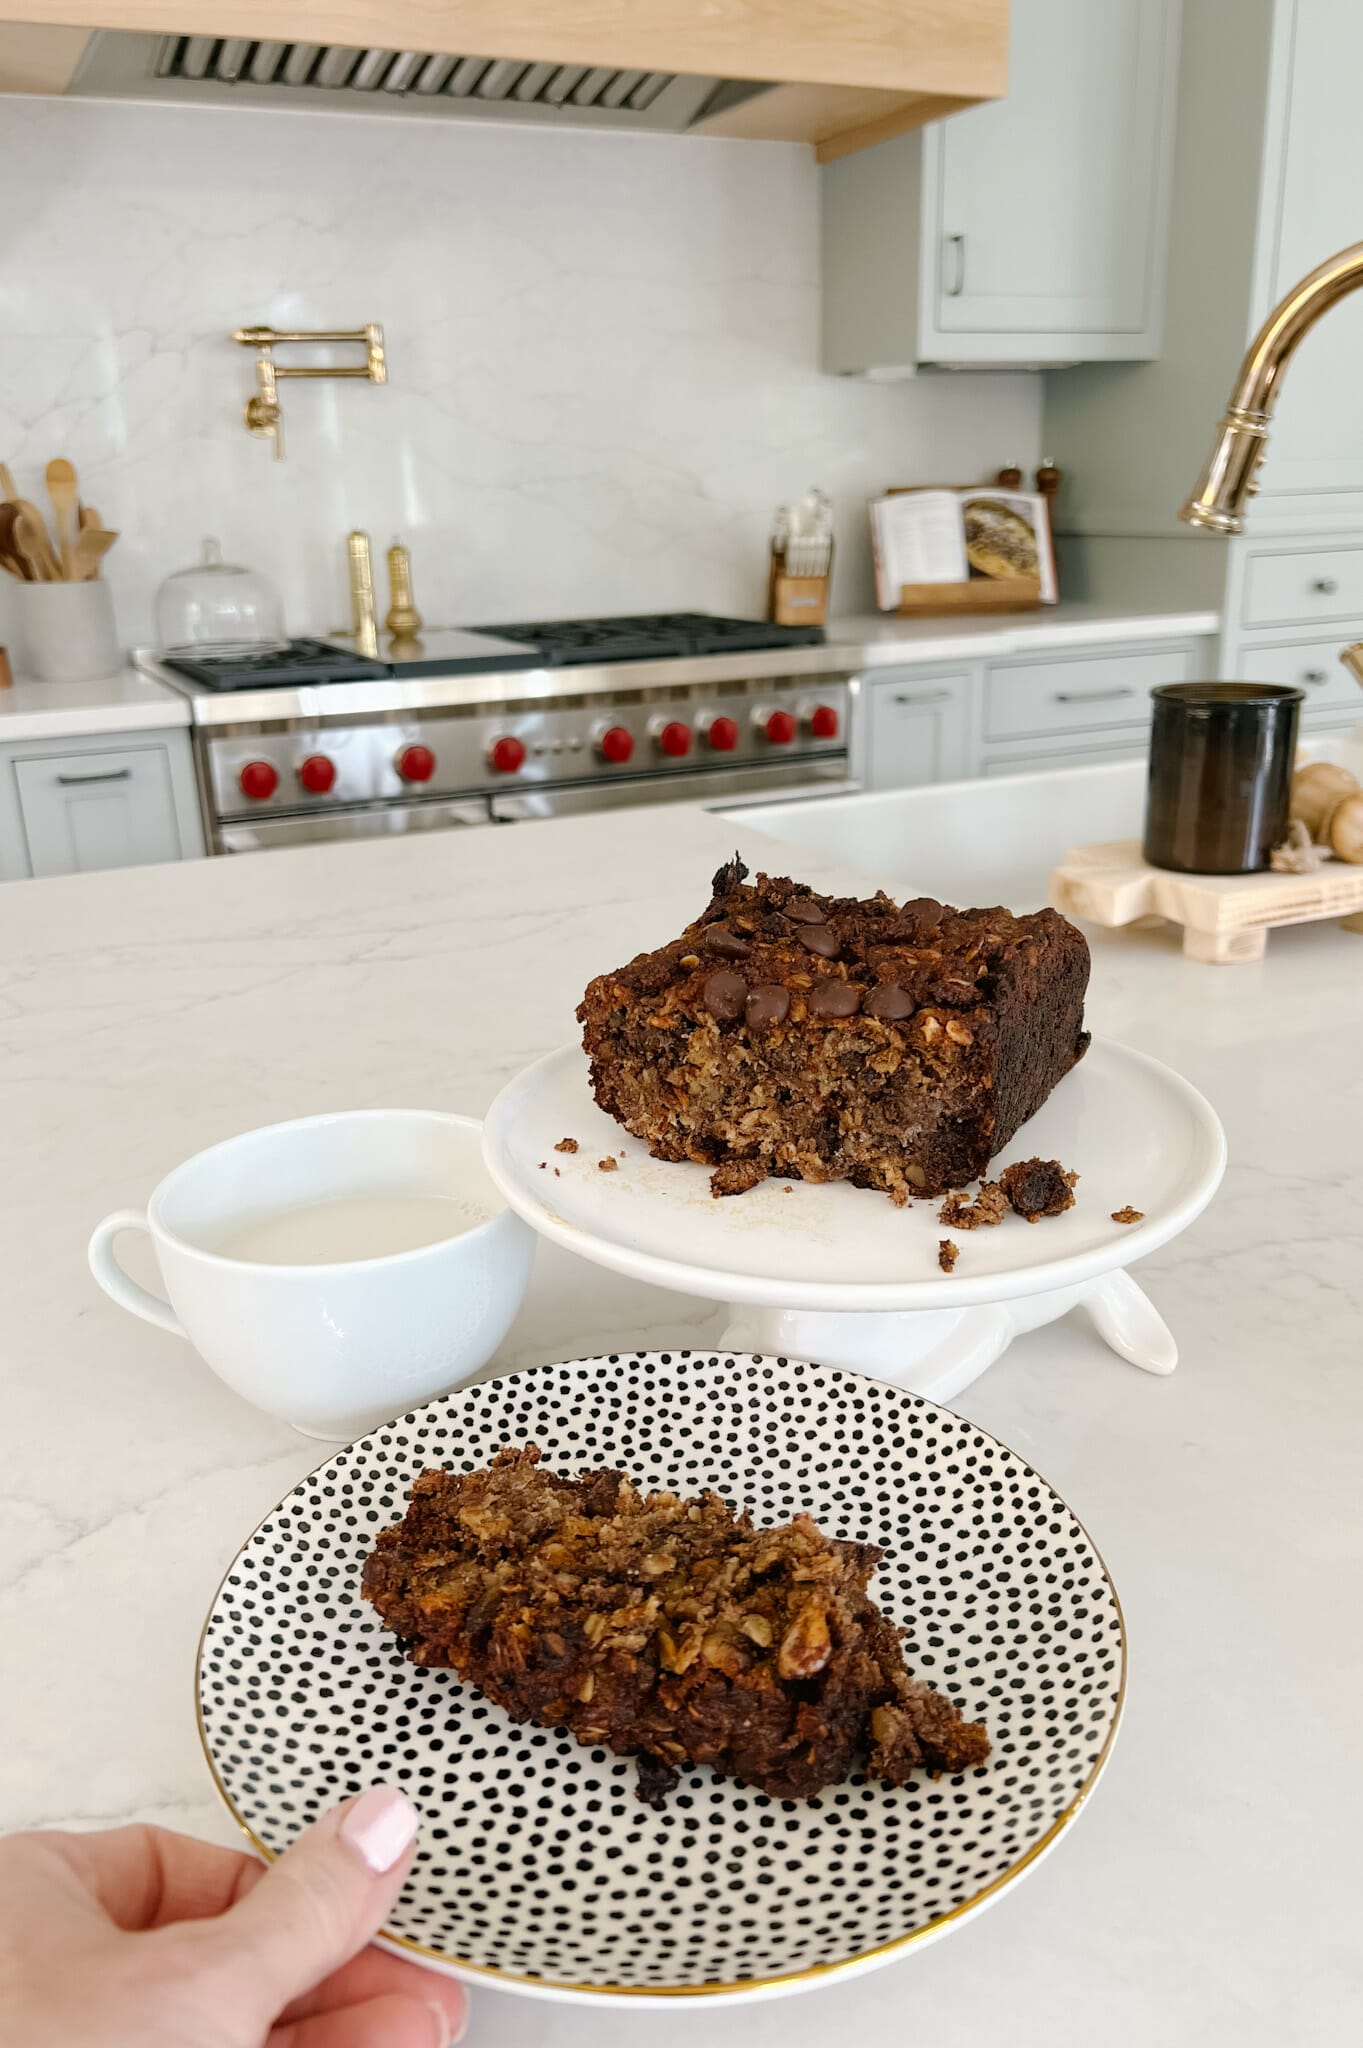 Cook with Me in My New Kitchen (Chocolate Chip Banana Bread)